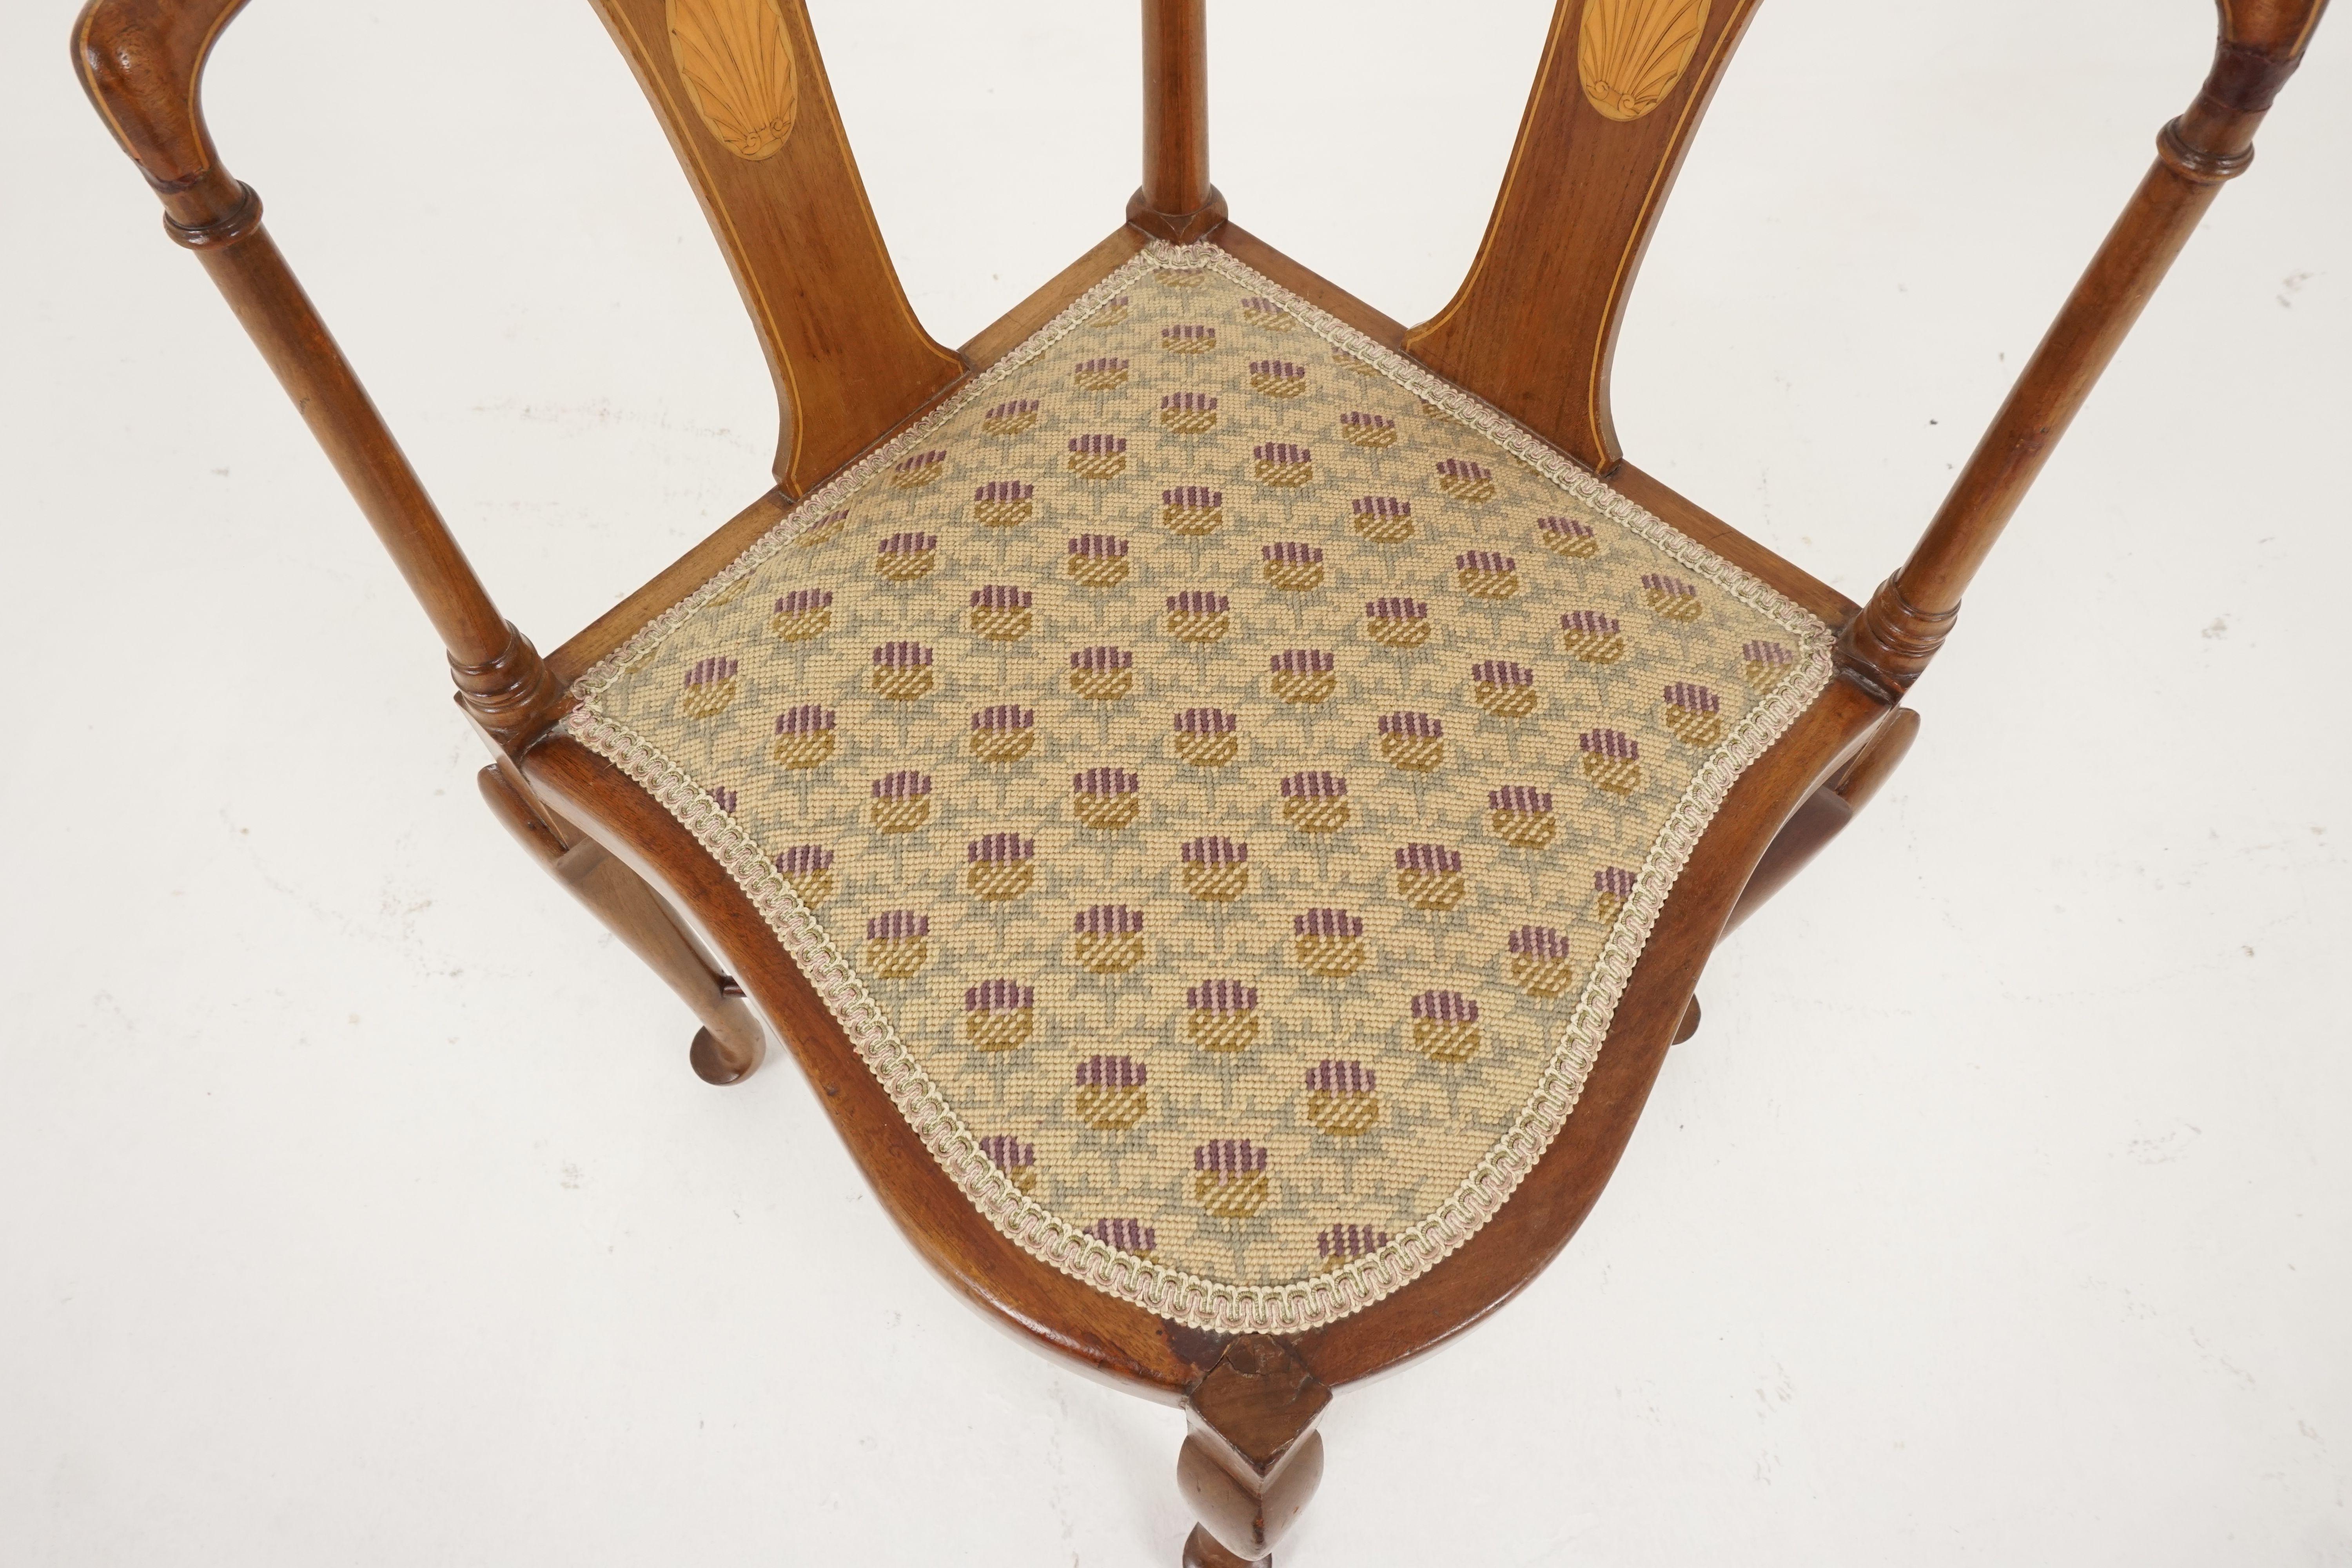 Antique Inlaid Walnut Upholstered Corner Chair, Scotland 1910, H152

Scotland 1910
Solid Walnut and Veneer
Original finish
Shaped and inlaid top rail
With inlaid decorative slats
A generous seat
All standing on four turned legs
United by X shaped